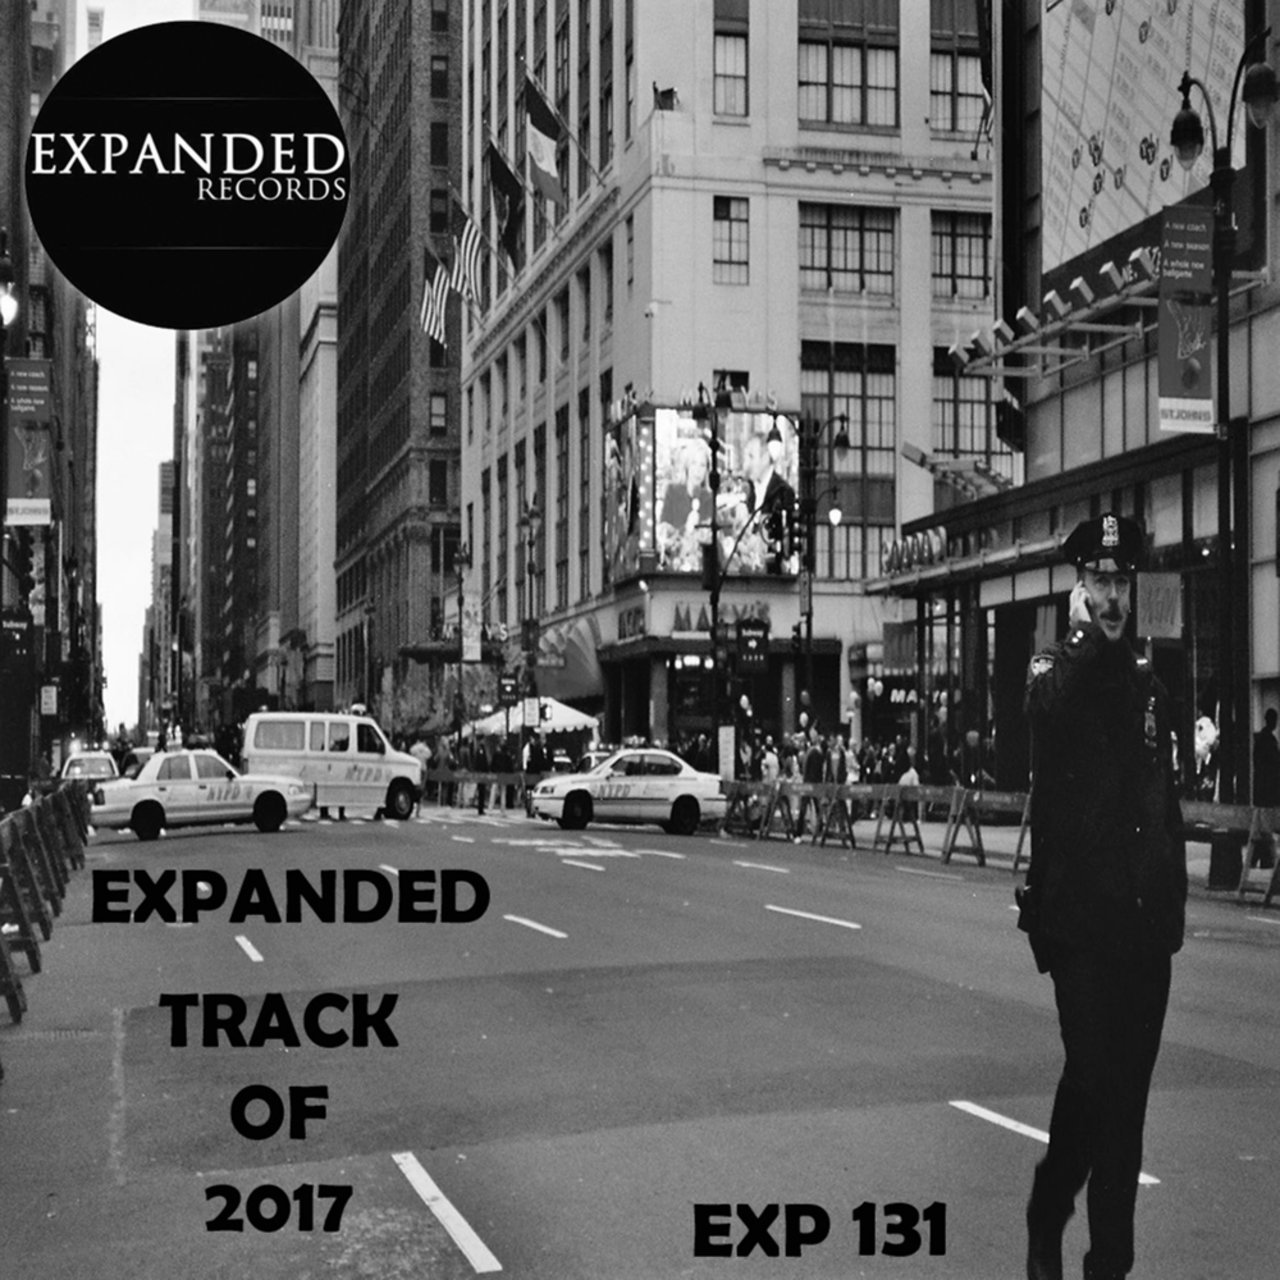 VA - Expanded Track Of 2017 / Expanded Records